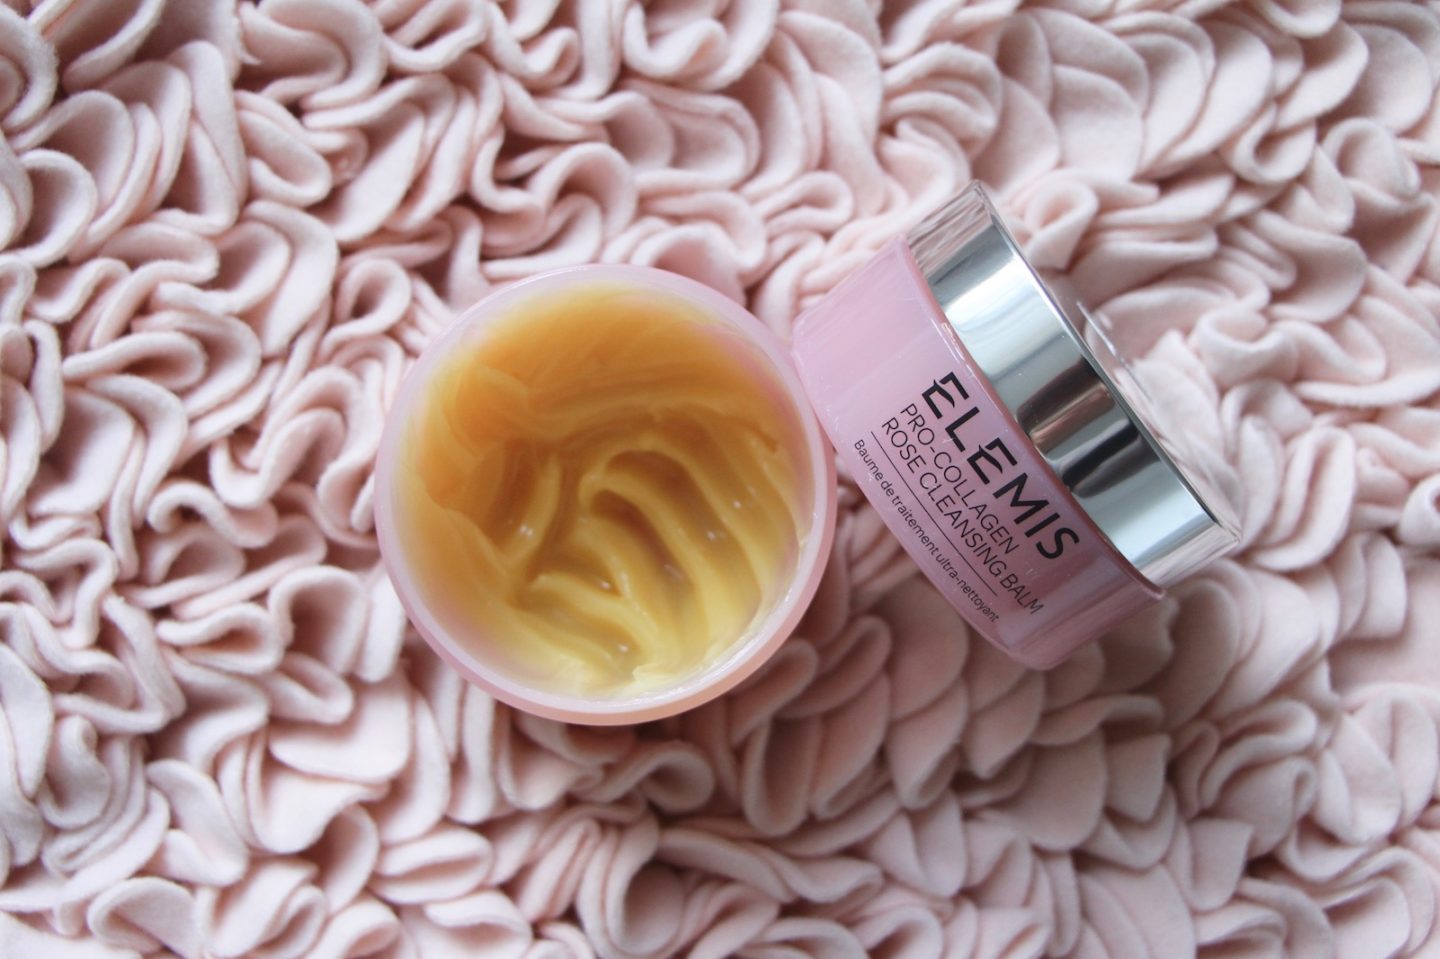 Skincare Review: Elemis Pro-Collagen Rose Cleansing Balm